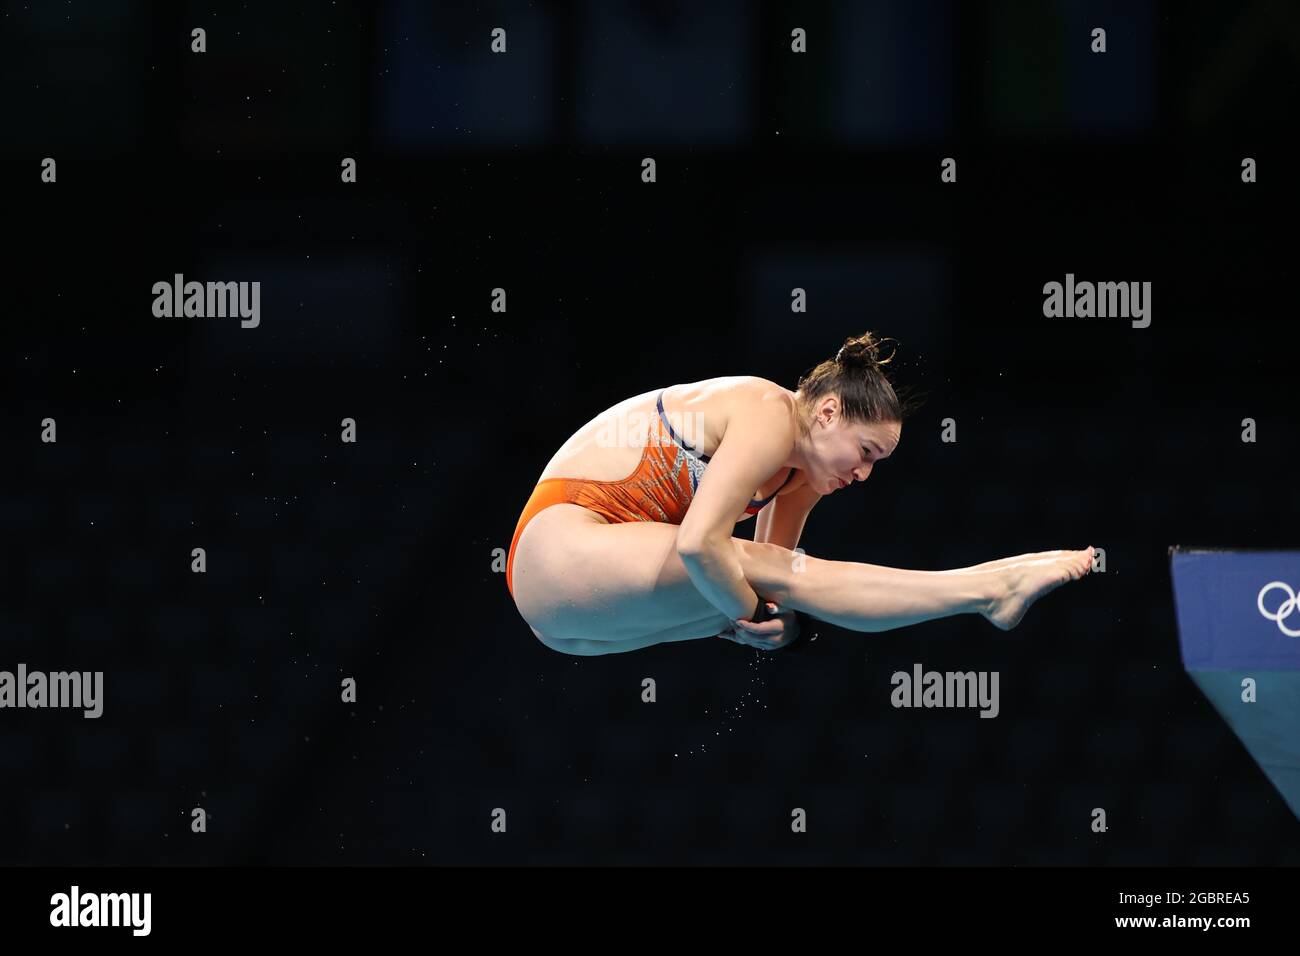 Tokyo, Japan. 5th Aug, 2021. van DUIJN Celine (NED) Diving : Women's 10m Platform Final during the Tokyo 2020 Olympic Games at the Tokyo Aquatics Centre in Tokyo, Japan . Credit: AFLO SPORT/Alamy Live News Stock Photo